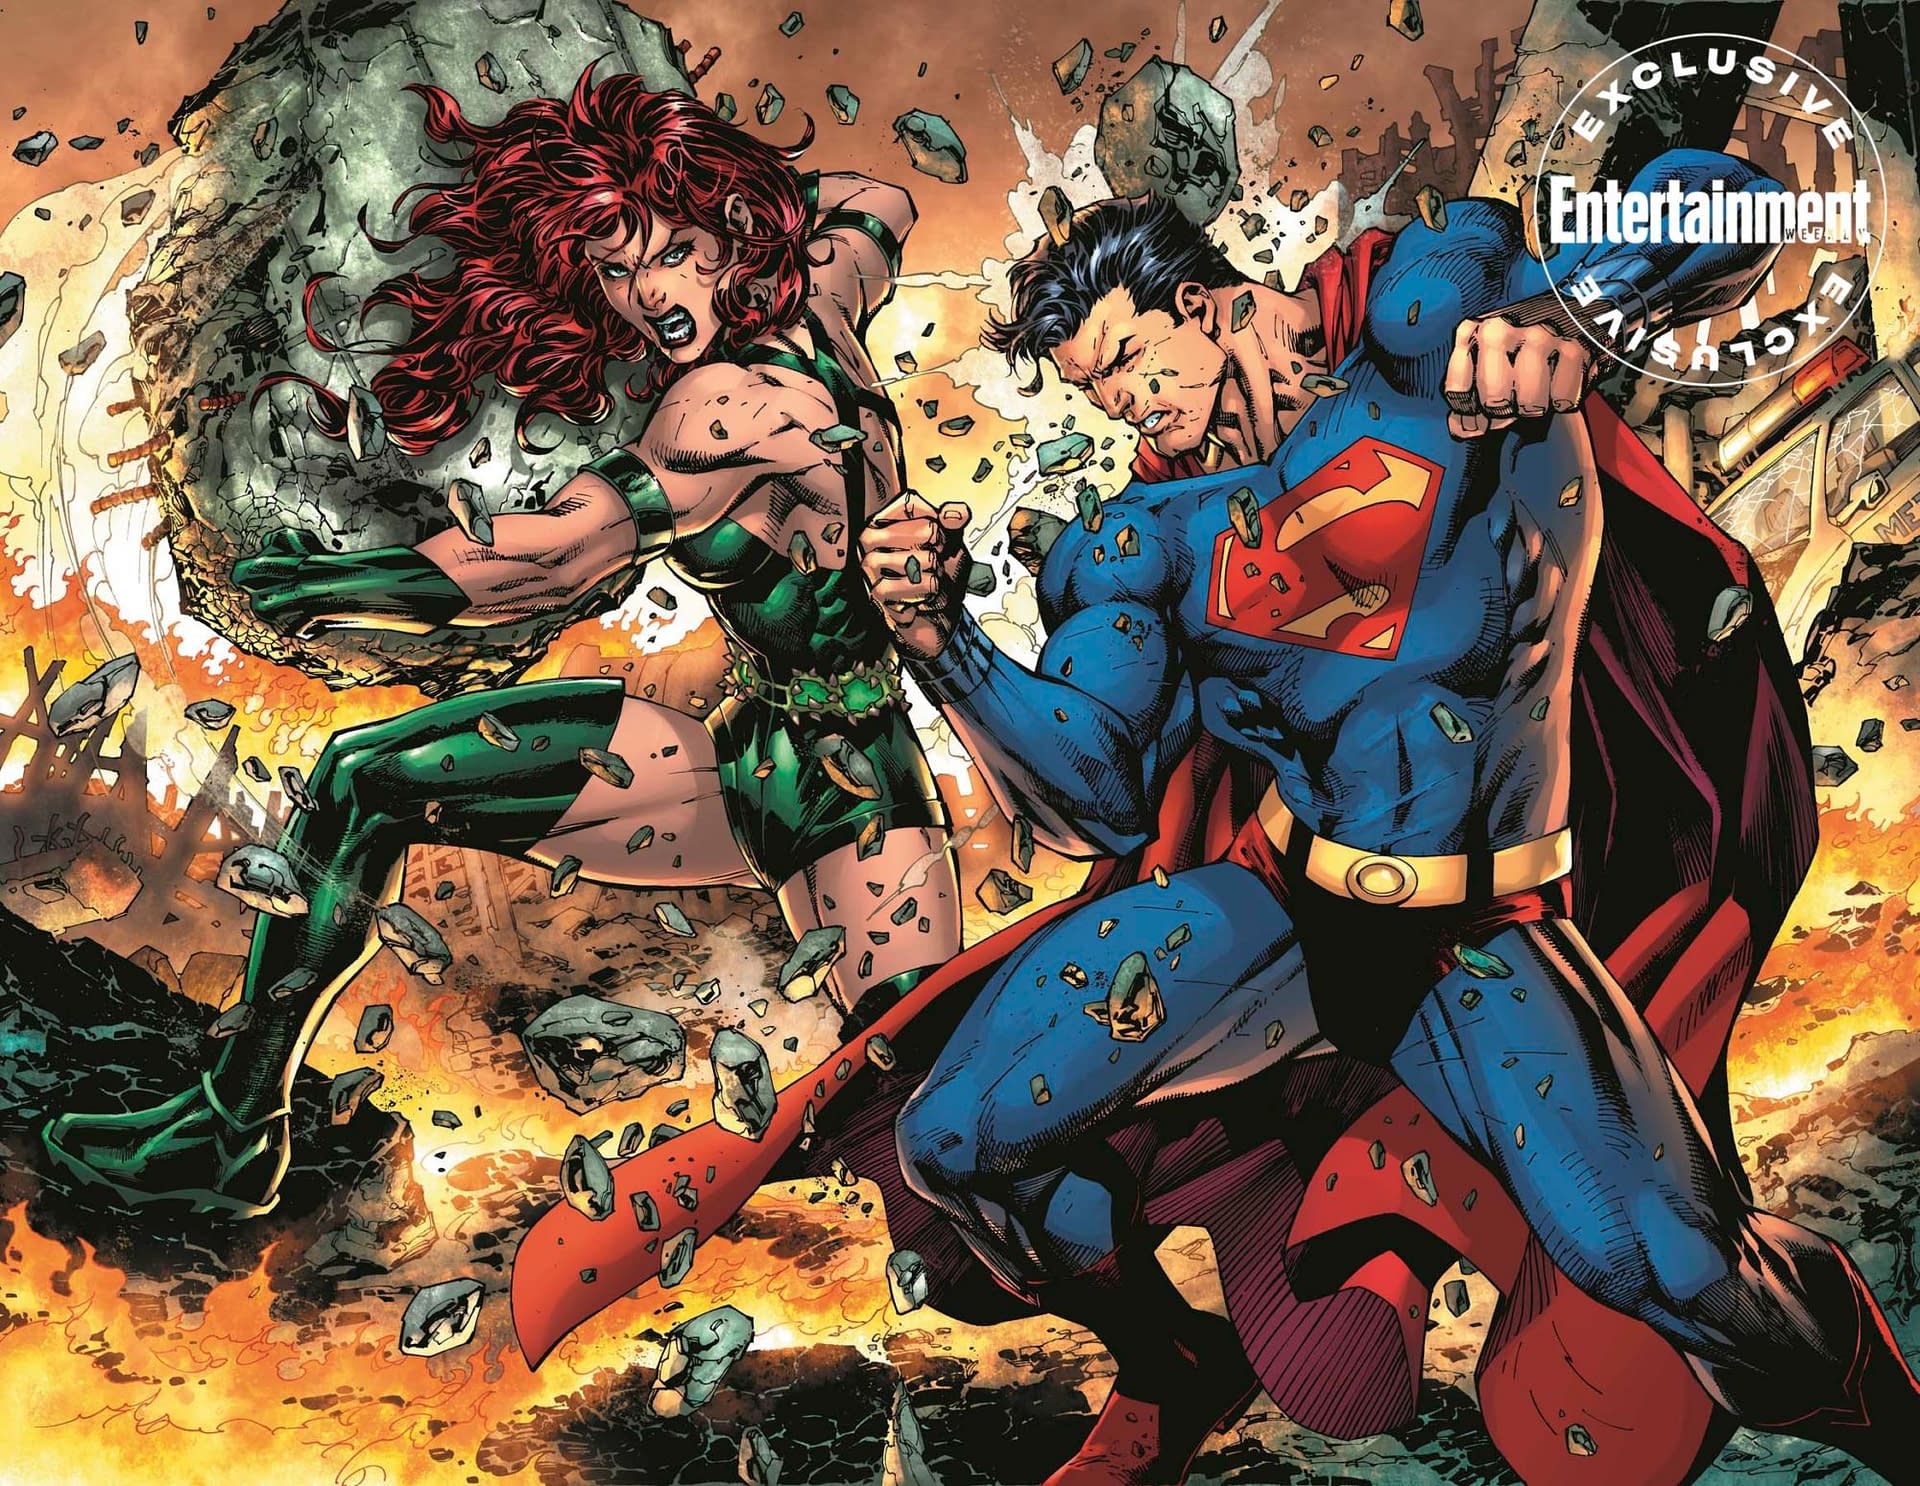 First Look at Jim Lee's Art from Legion of Superheroes, DC's Answer to Burning Amazon Rainforests